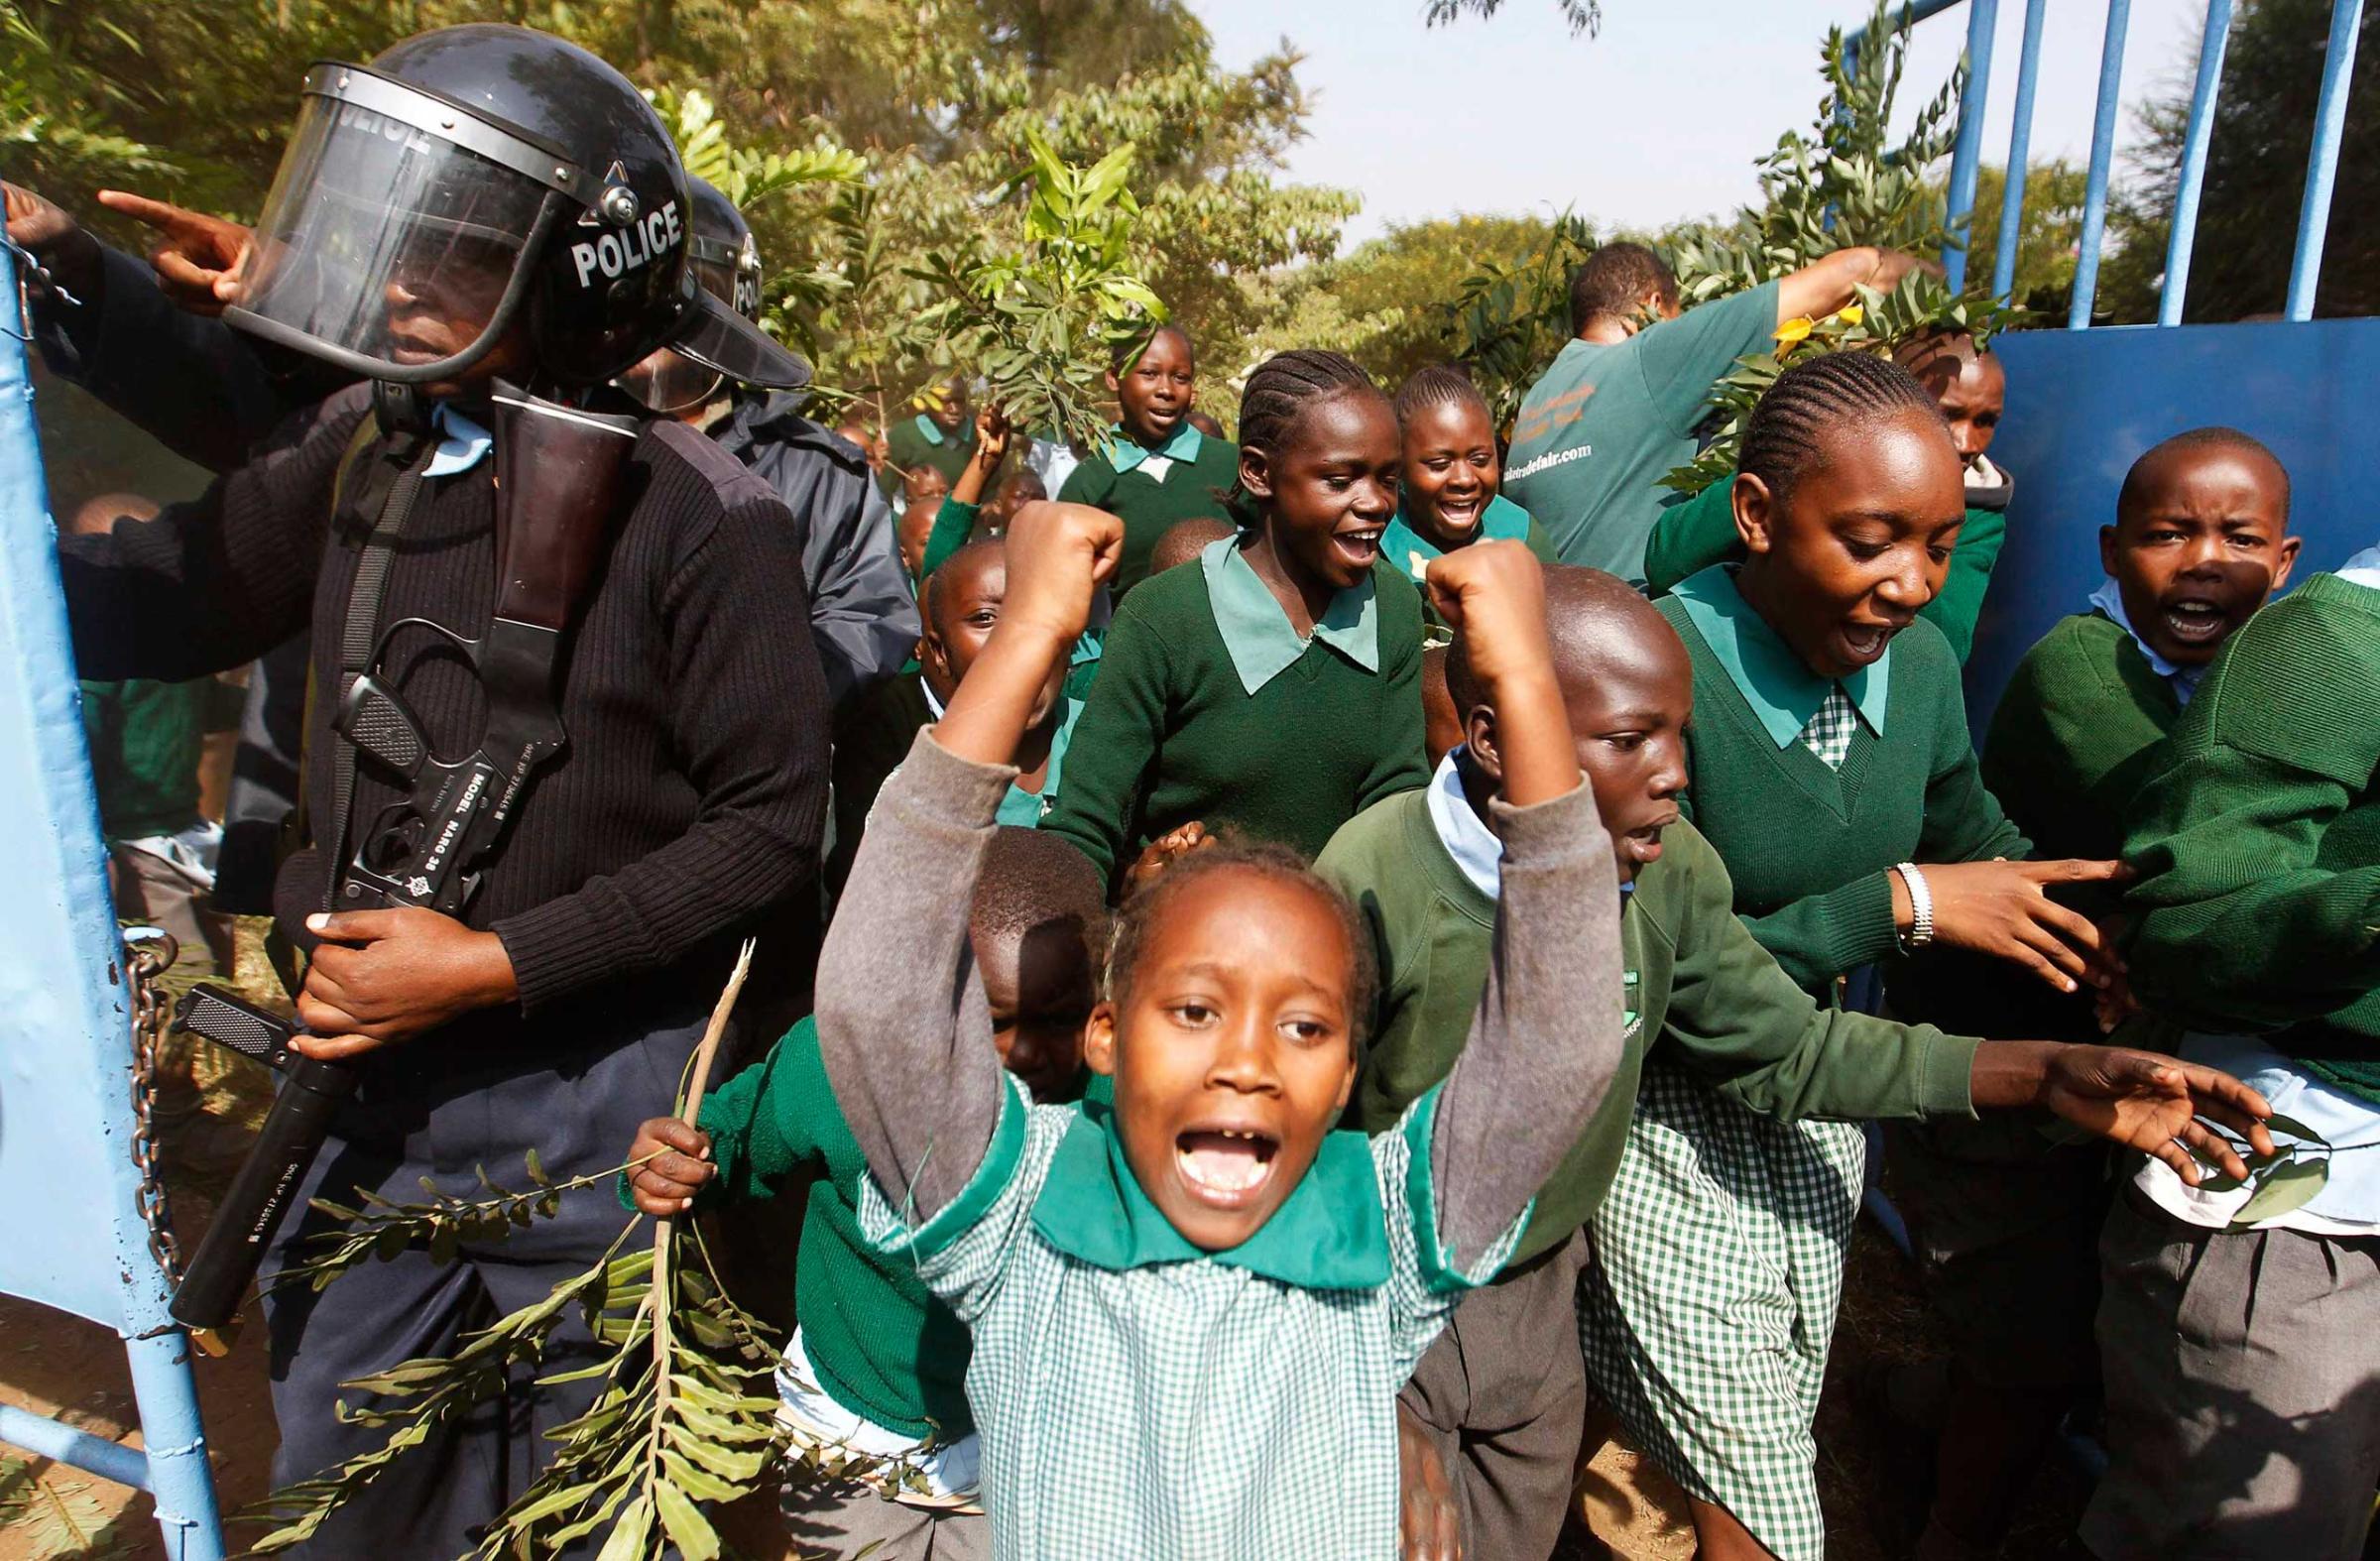 Students from Langata primary school run past riot police as they protest against a perimeter wall illegally erected by a private developer around their school playground in Nairobi, Jan. 19, 2015.